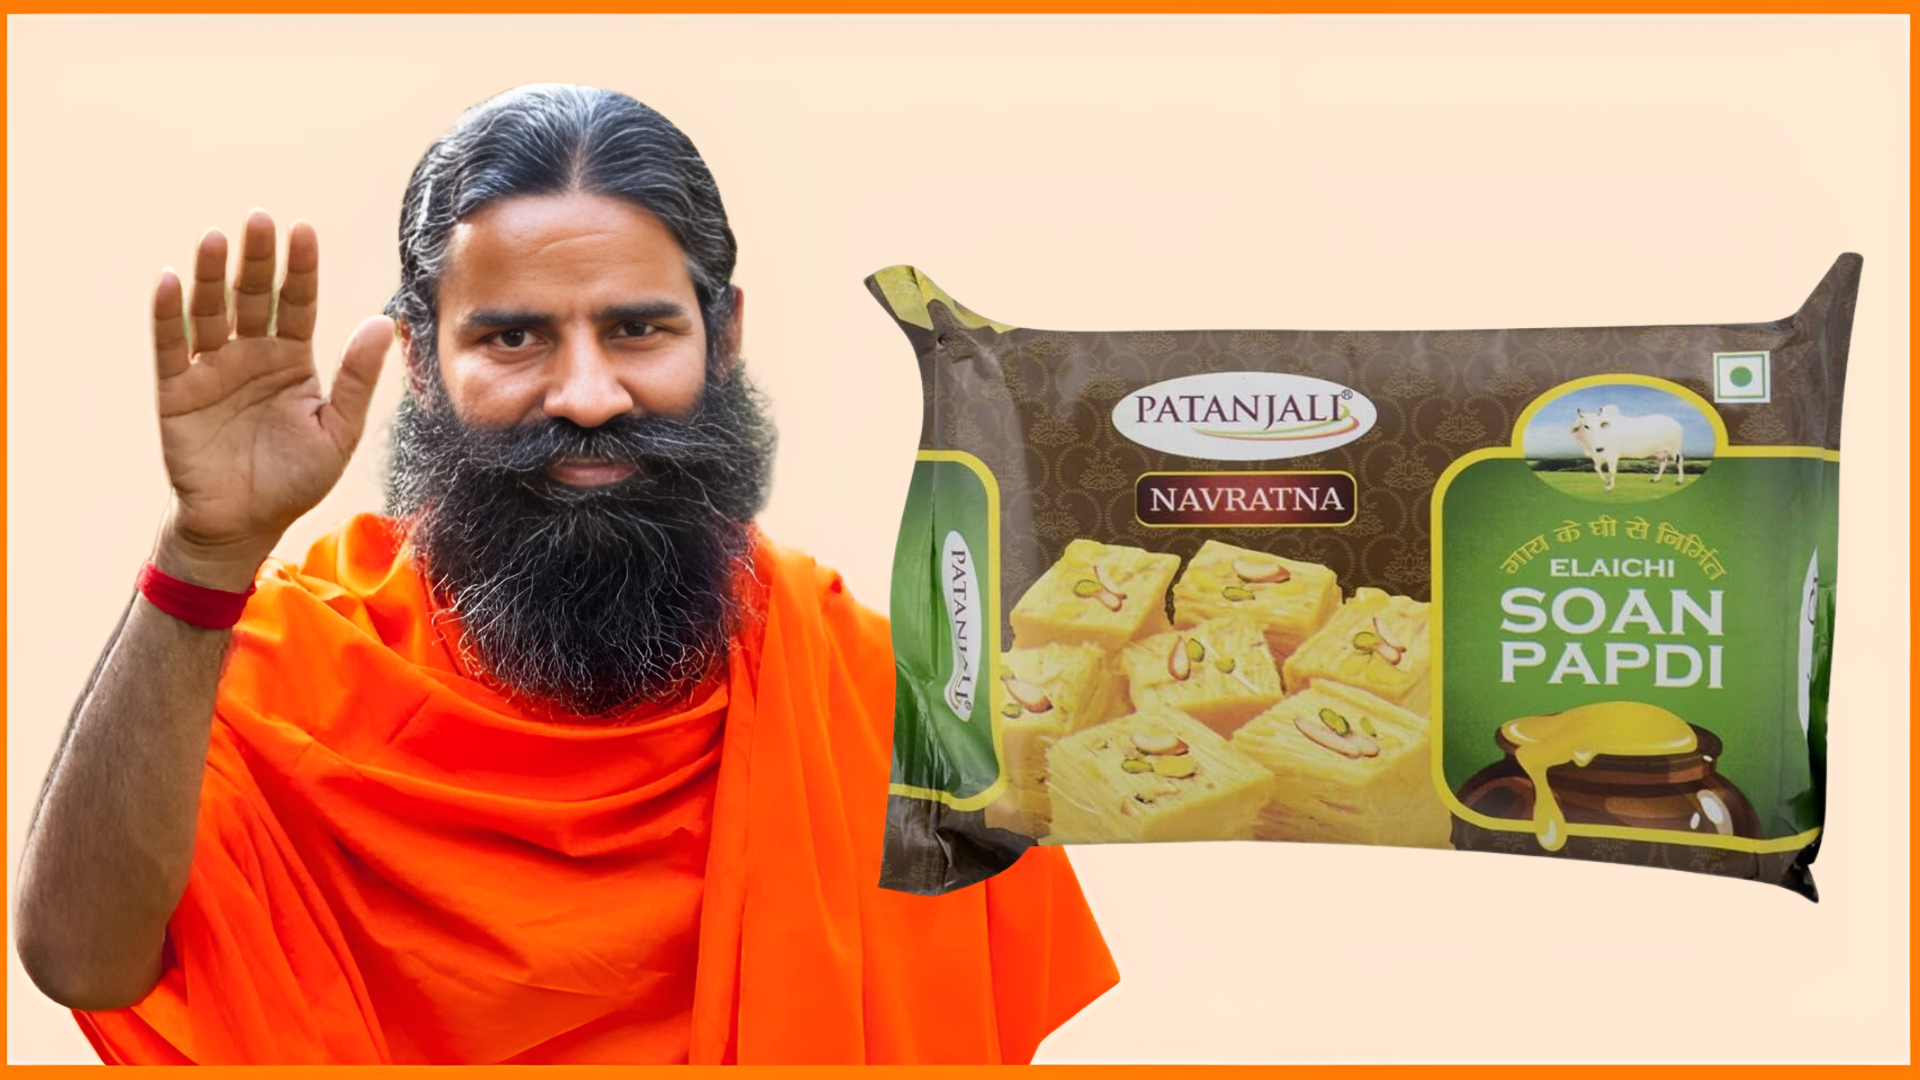 Patanjali Fails Soan Papdi Quality Test, Asst. Manager Sentenced To Six Months Of Prison